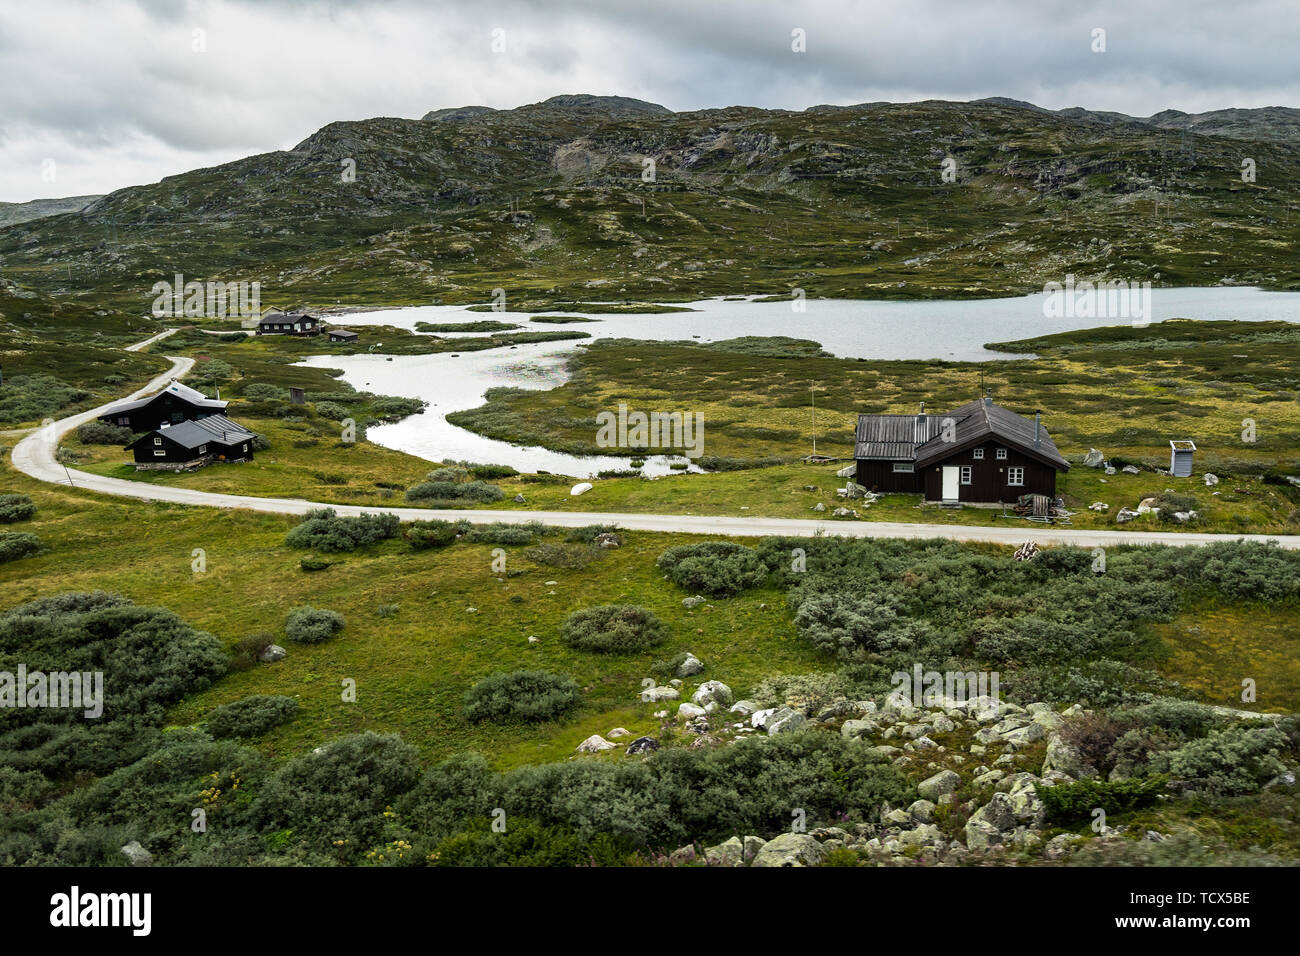 A remote village surrounded by mountains and lakes on the plateau of Hardangervidda National Park, Norway. Photo taken from Oslo-Bergen train Stock Photo